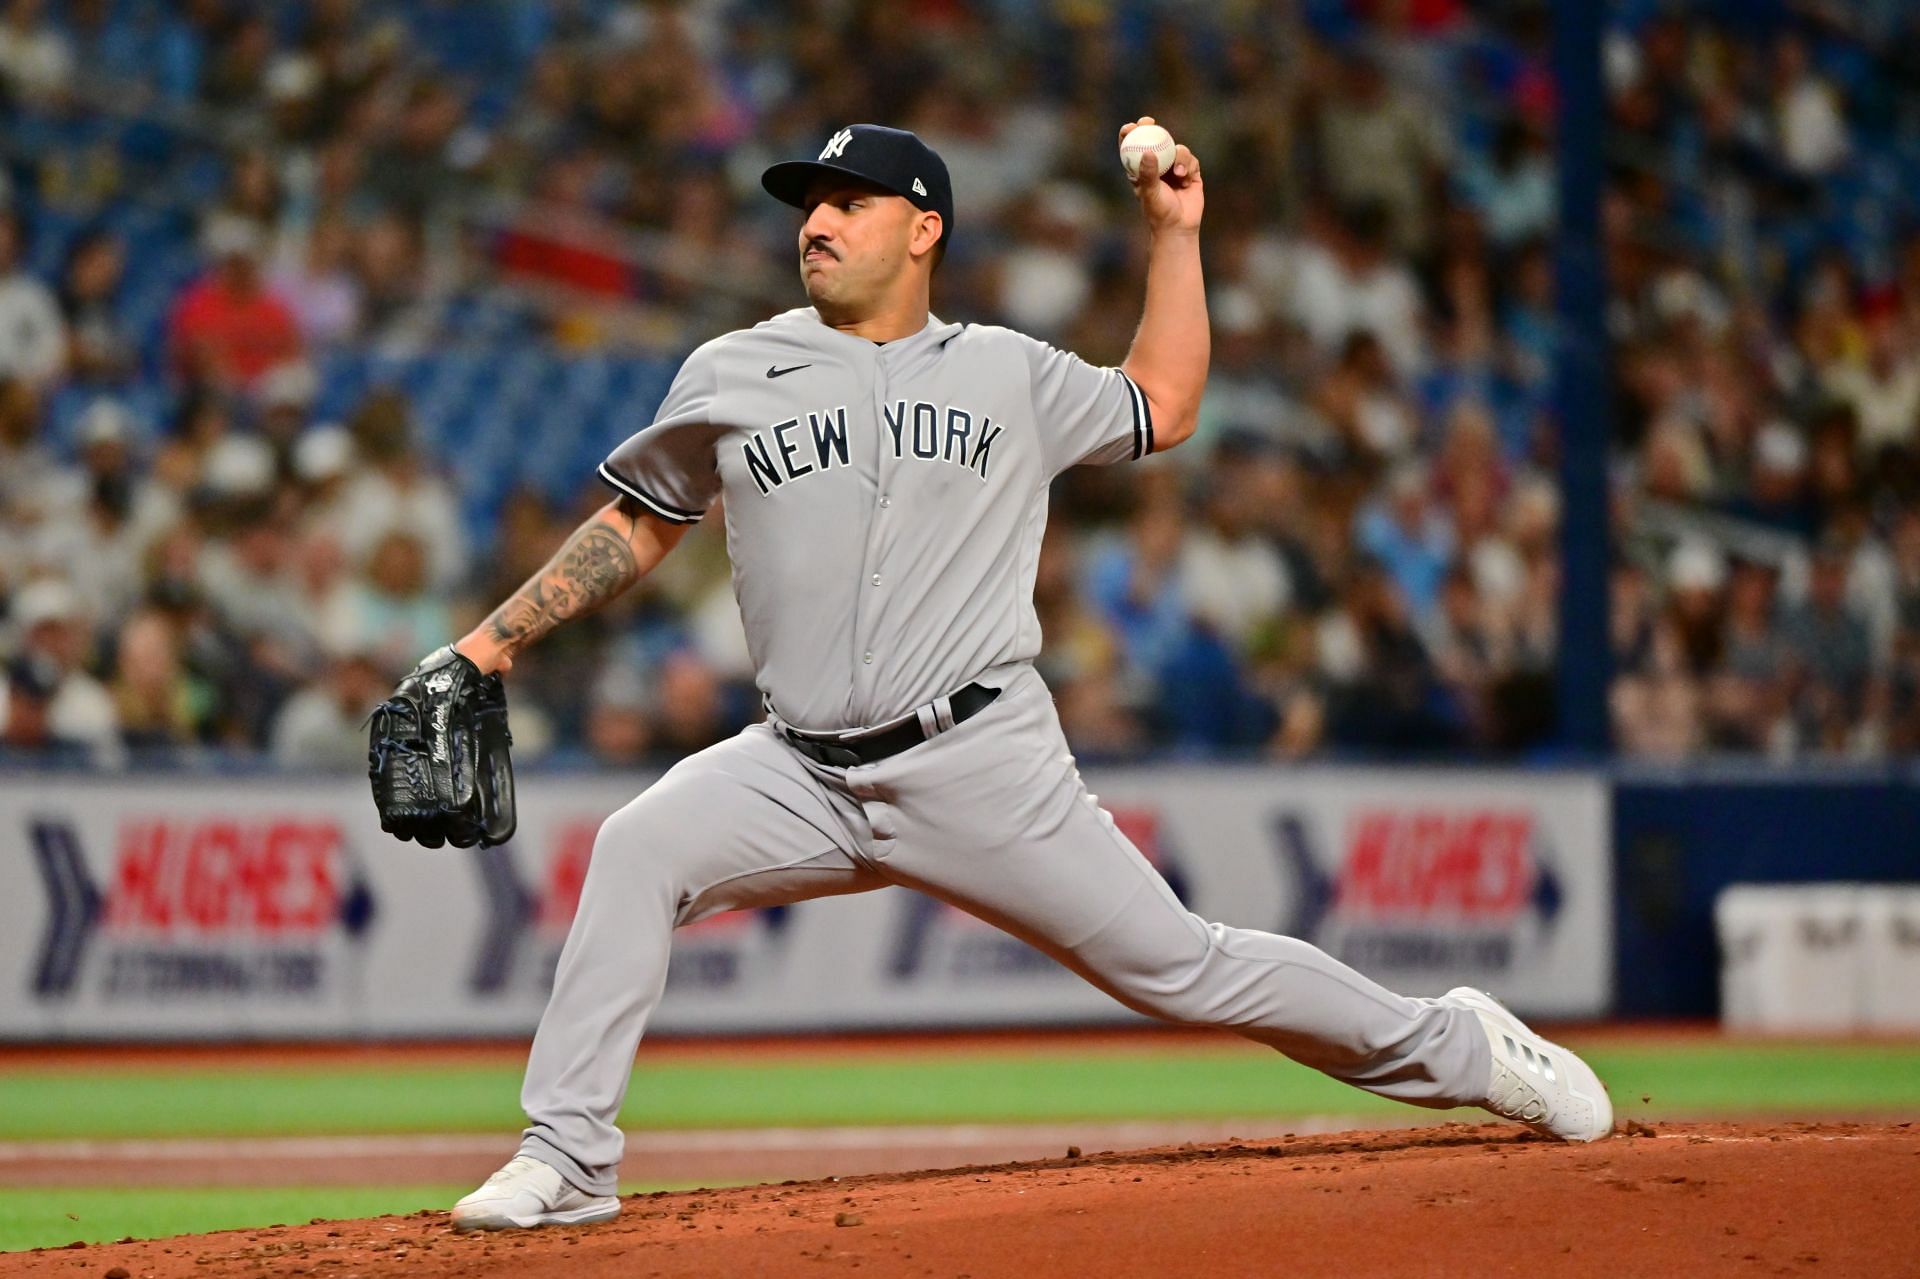 New York Yankees pitcher Nestor Cortes is having the best season of his career, wants to keep grounded and grateful for his success.